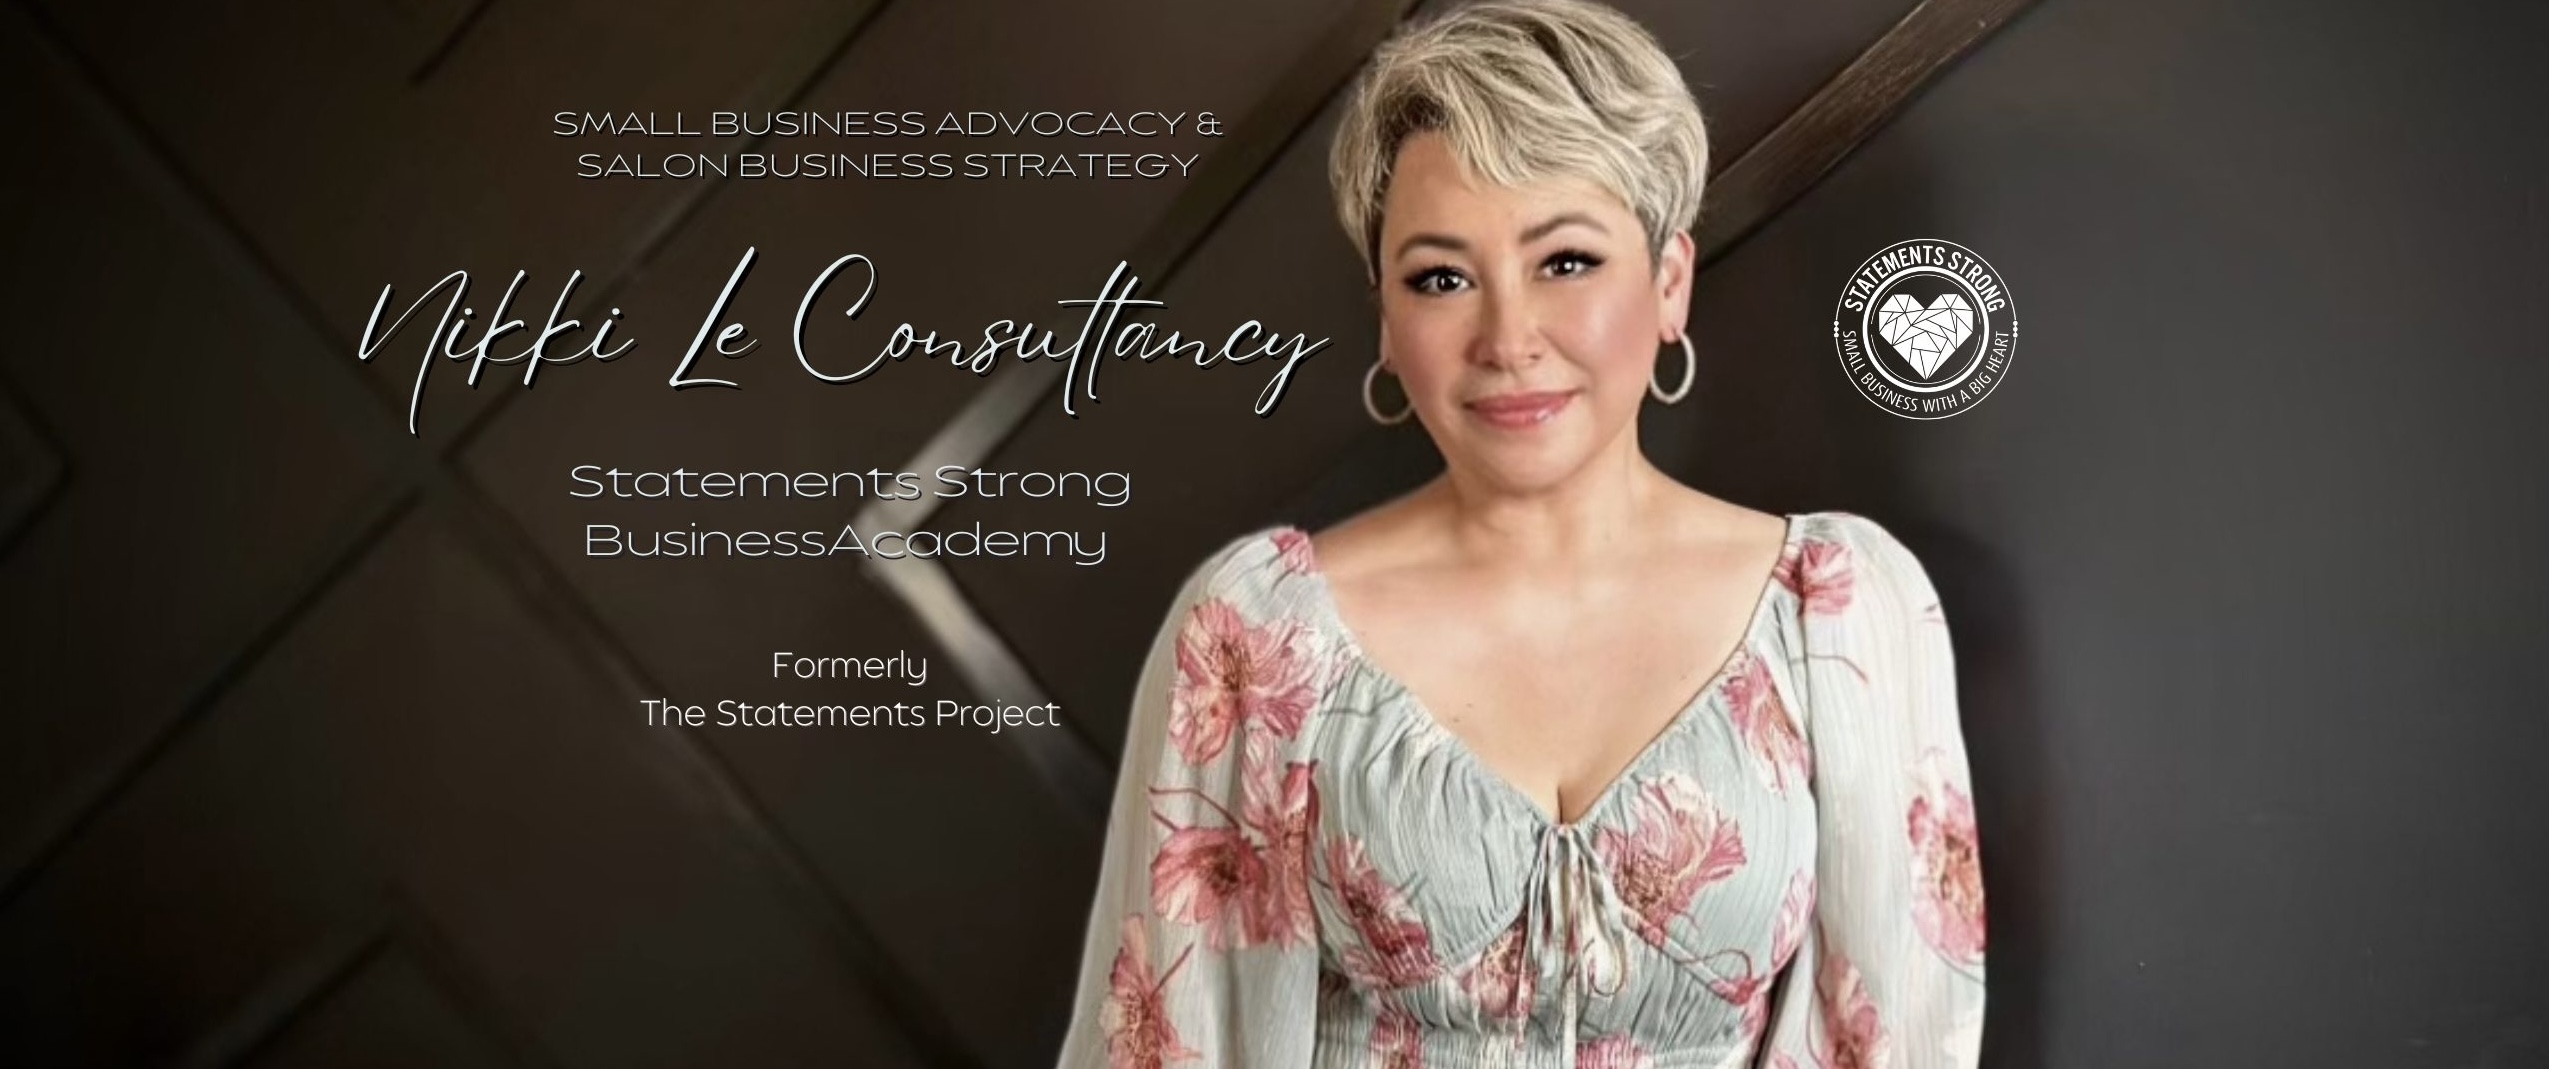 Small Business Advocacy and Salon Business Strategy  